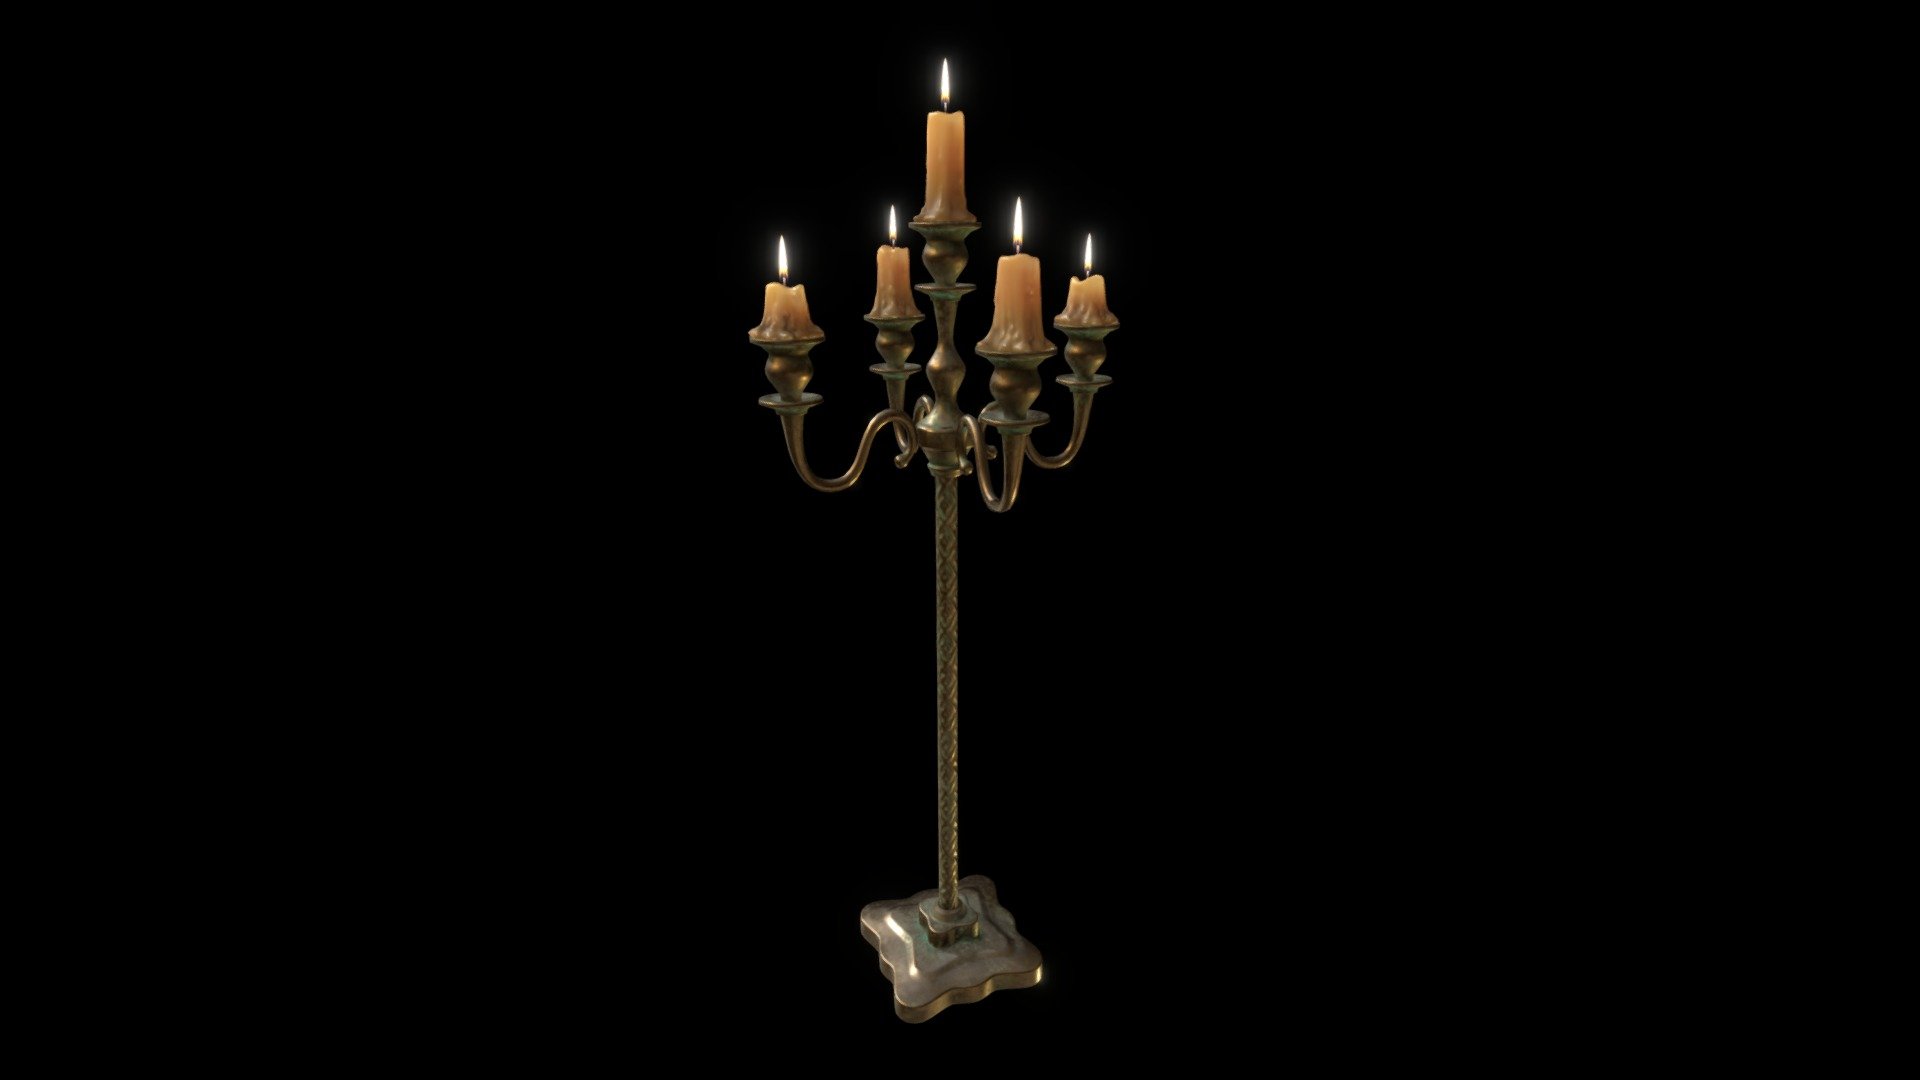 For the project “A Life Journey of the Soul” - Candlestick (texturing) - 3D model by • Less • (@lessart) 3d model